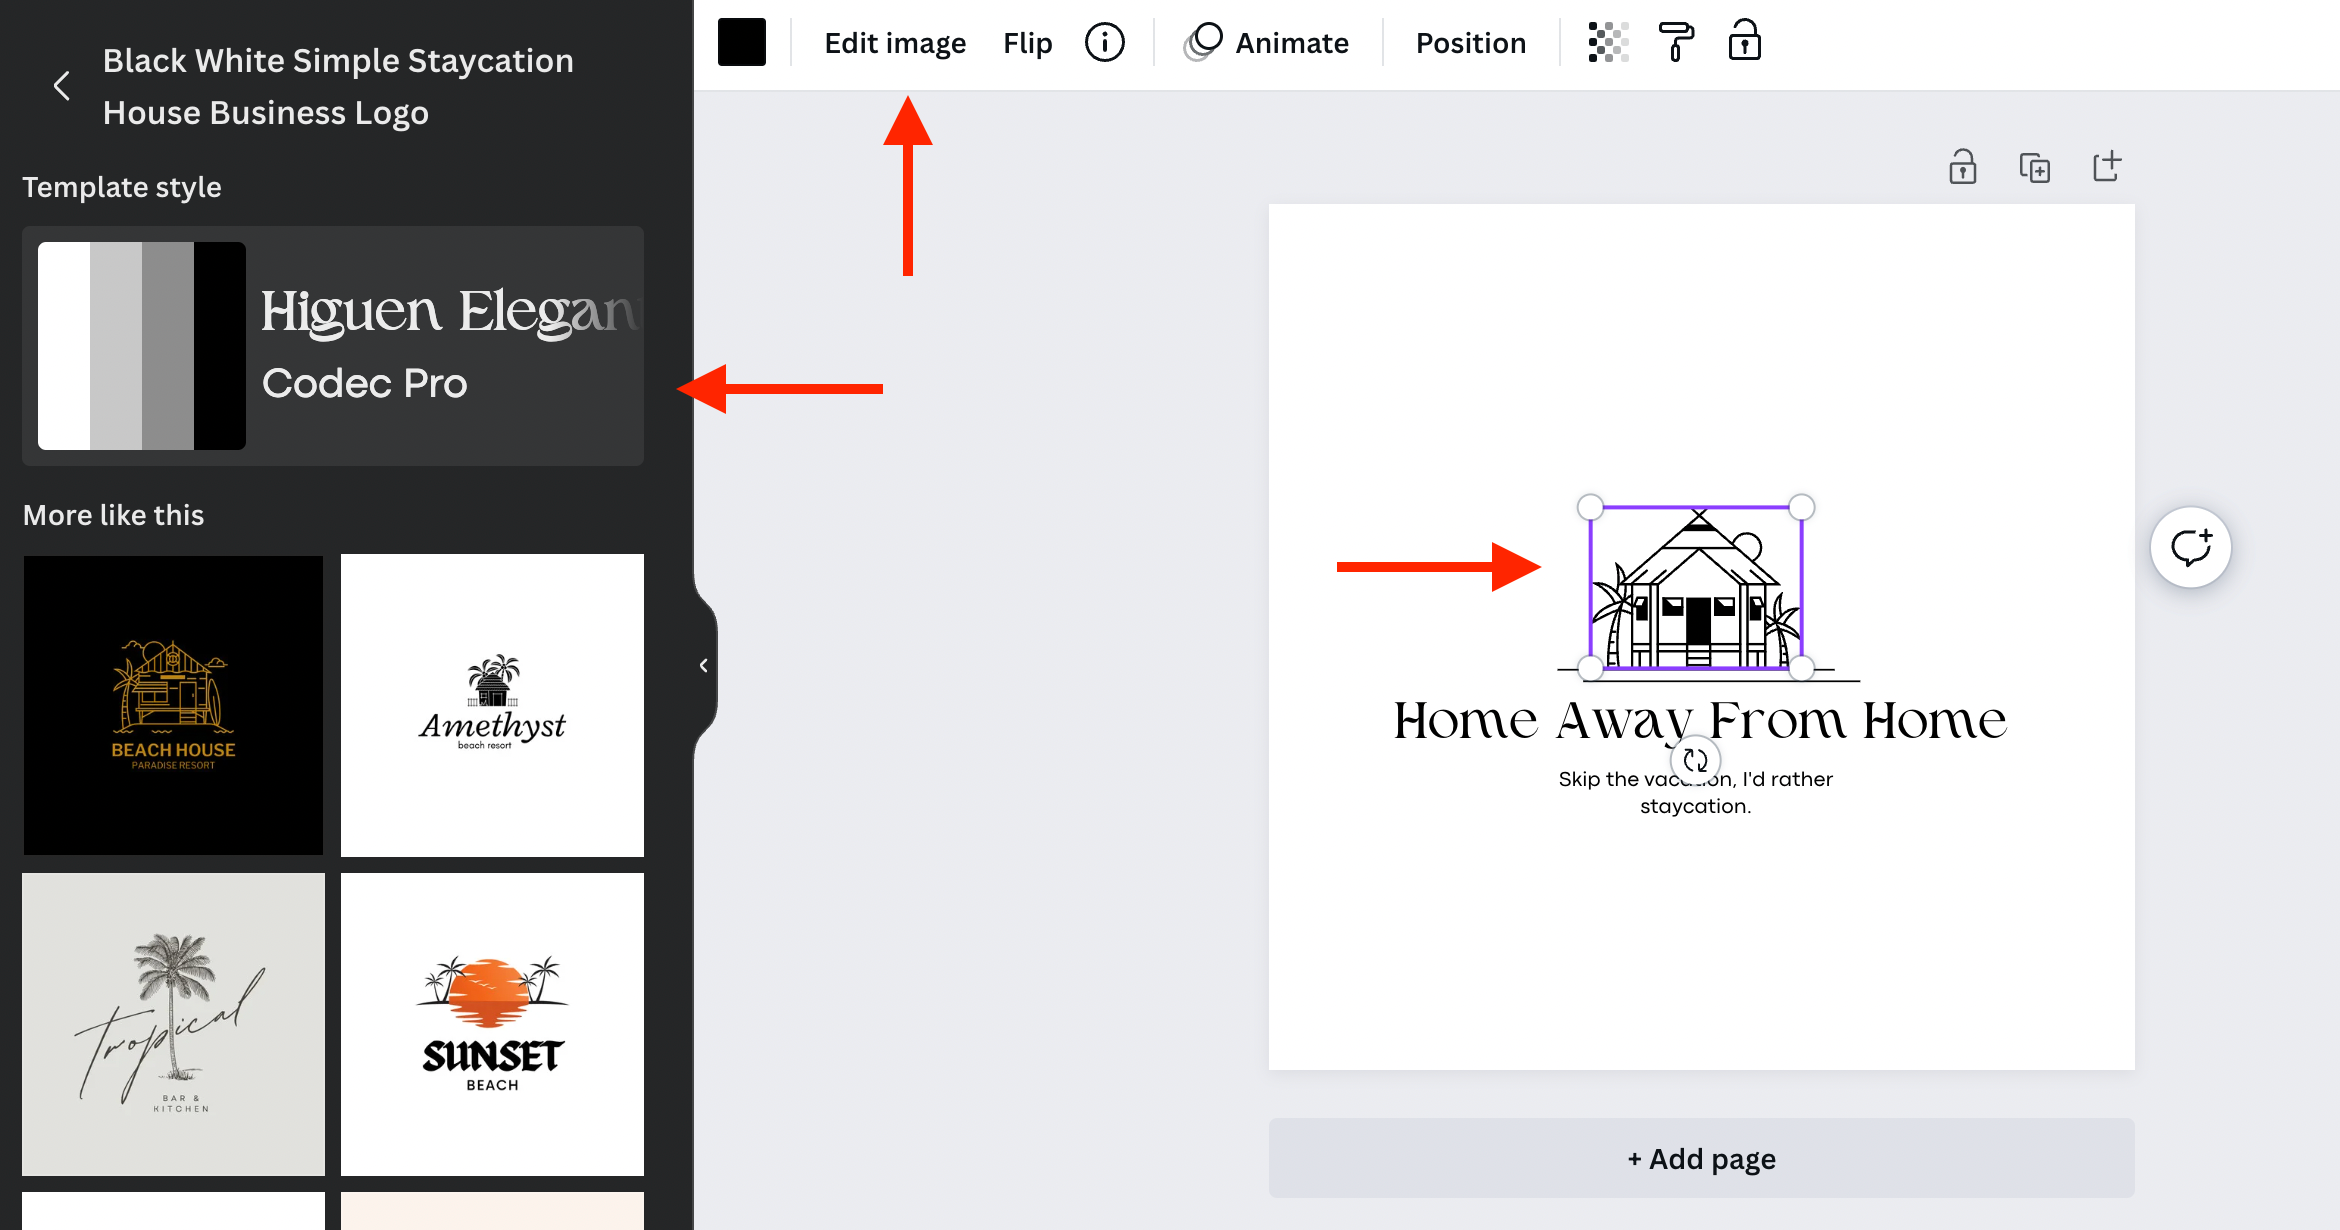 Use Canva's easily labeled tools to adjust your logo.